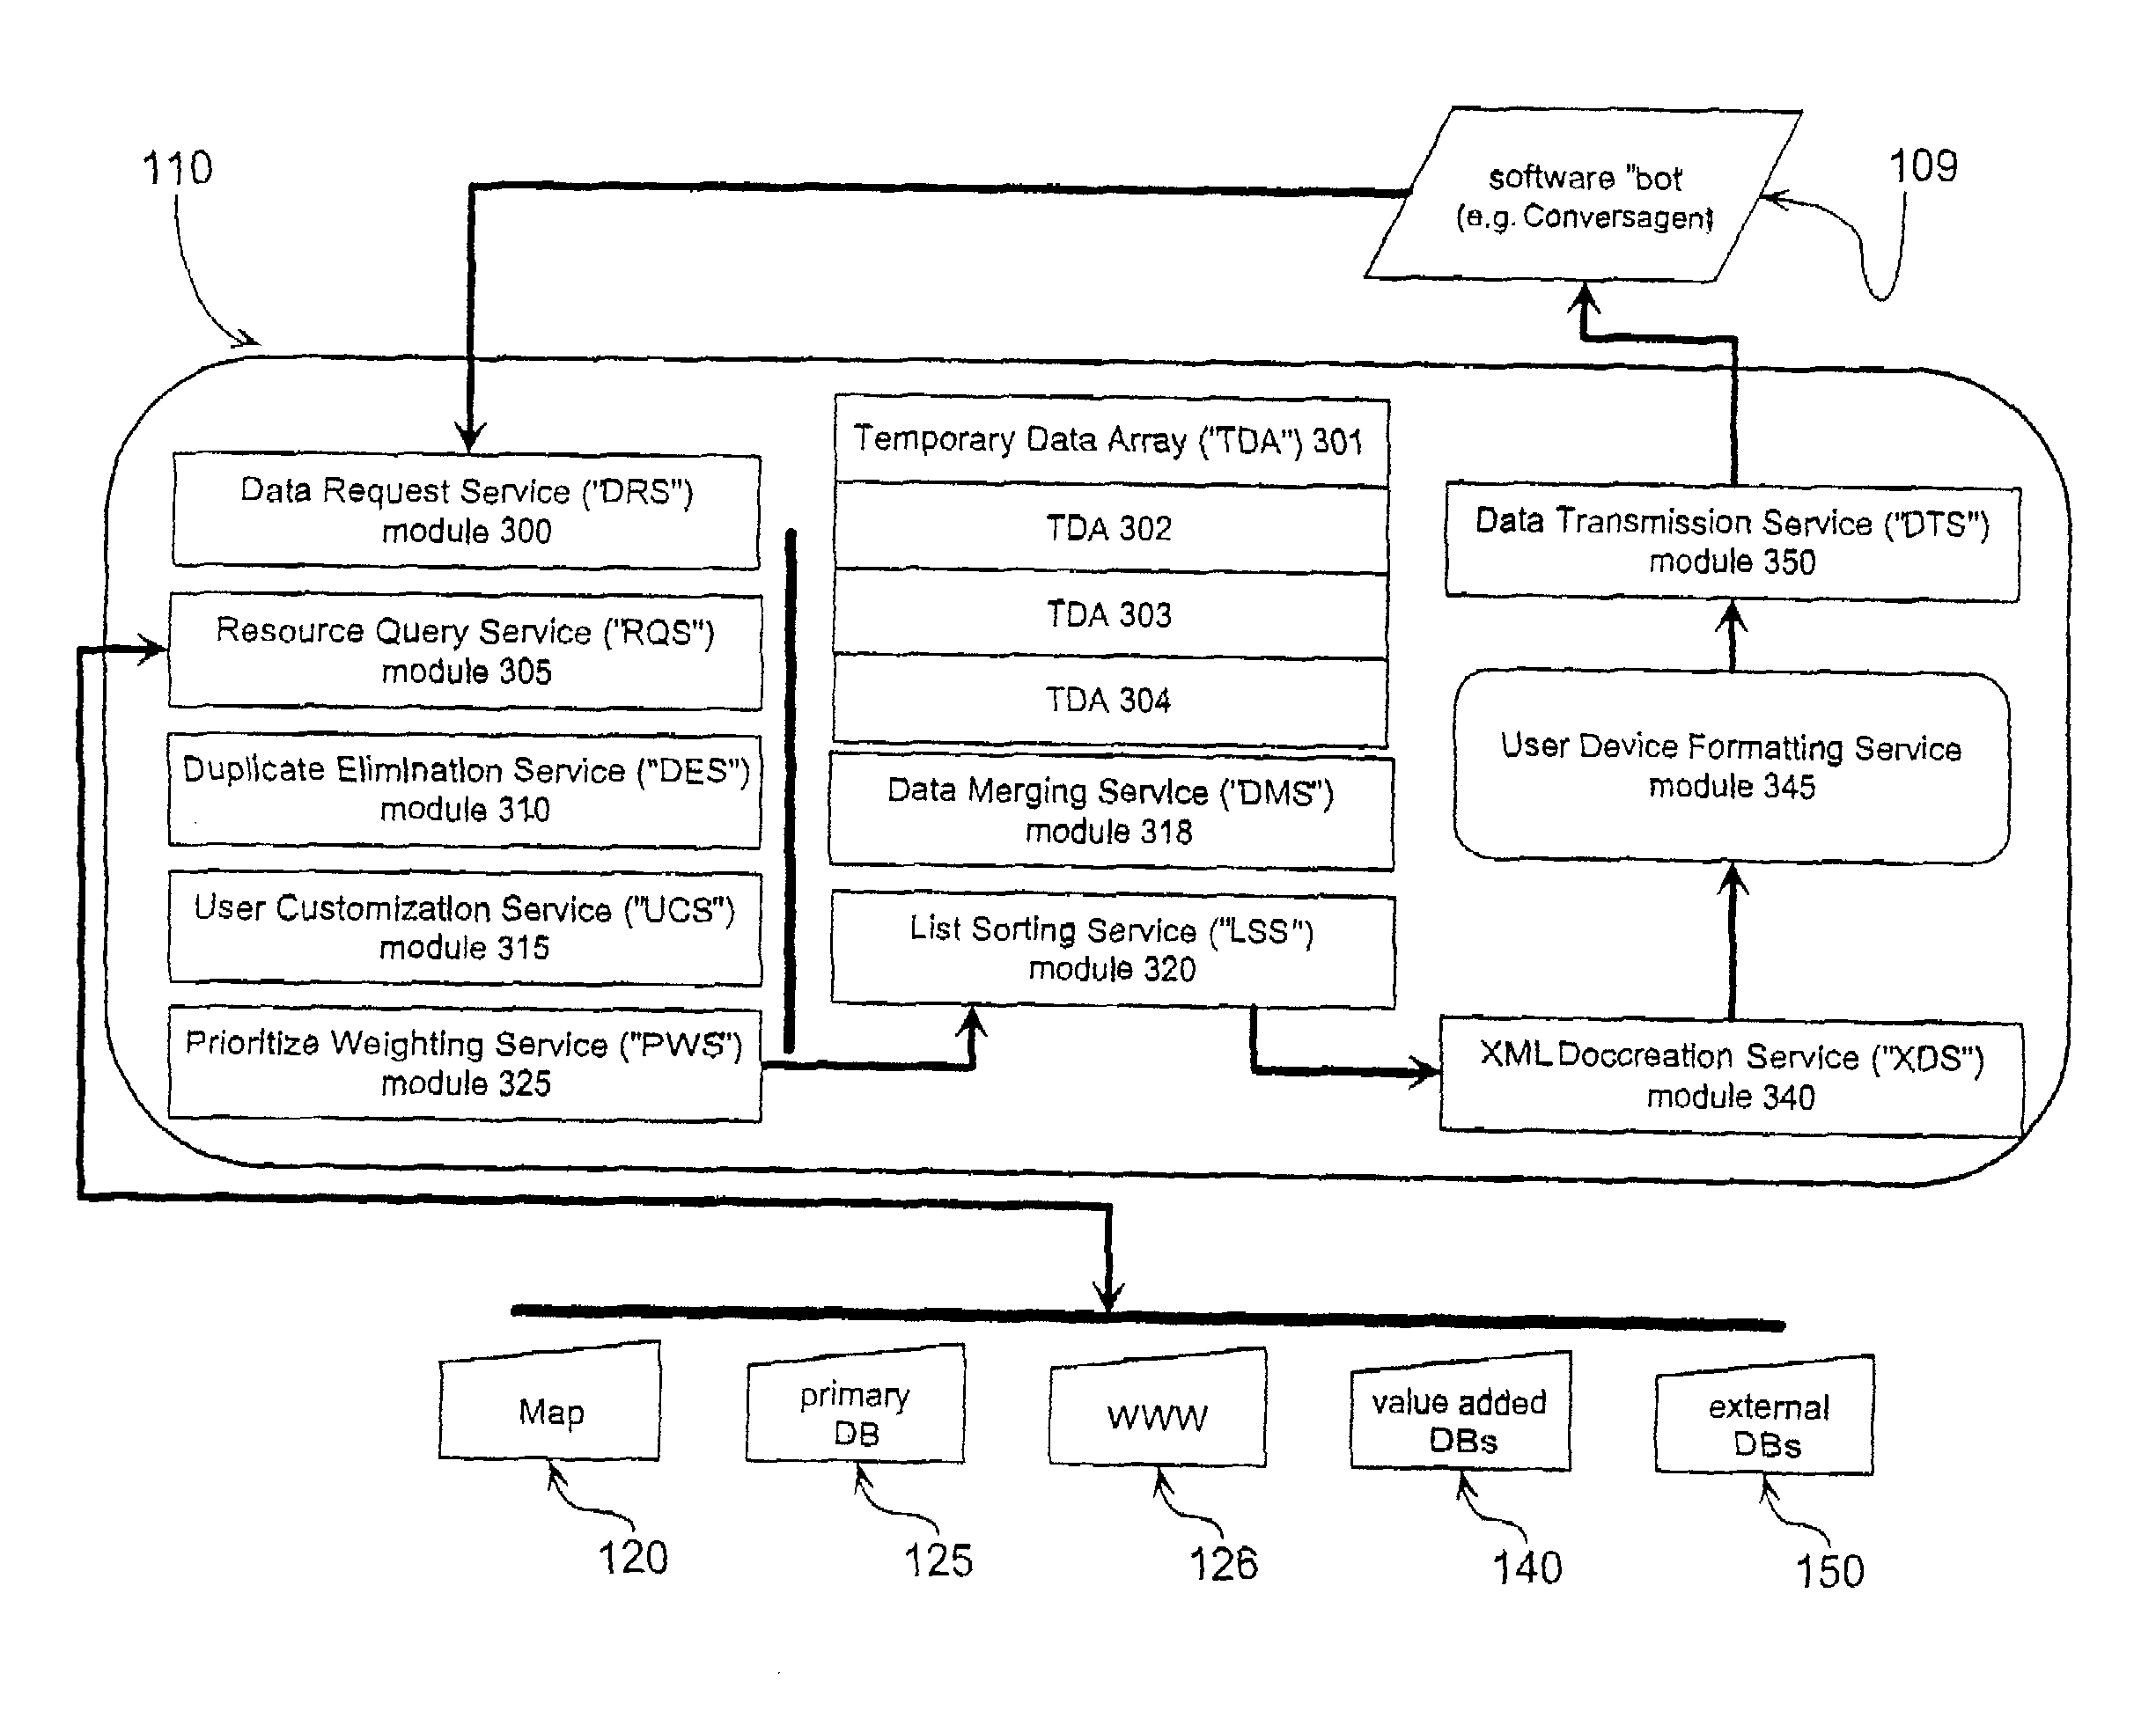 Multi-mode location based e-directory service enabling method, system, and apparatus